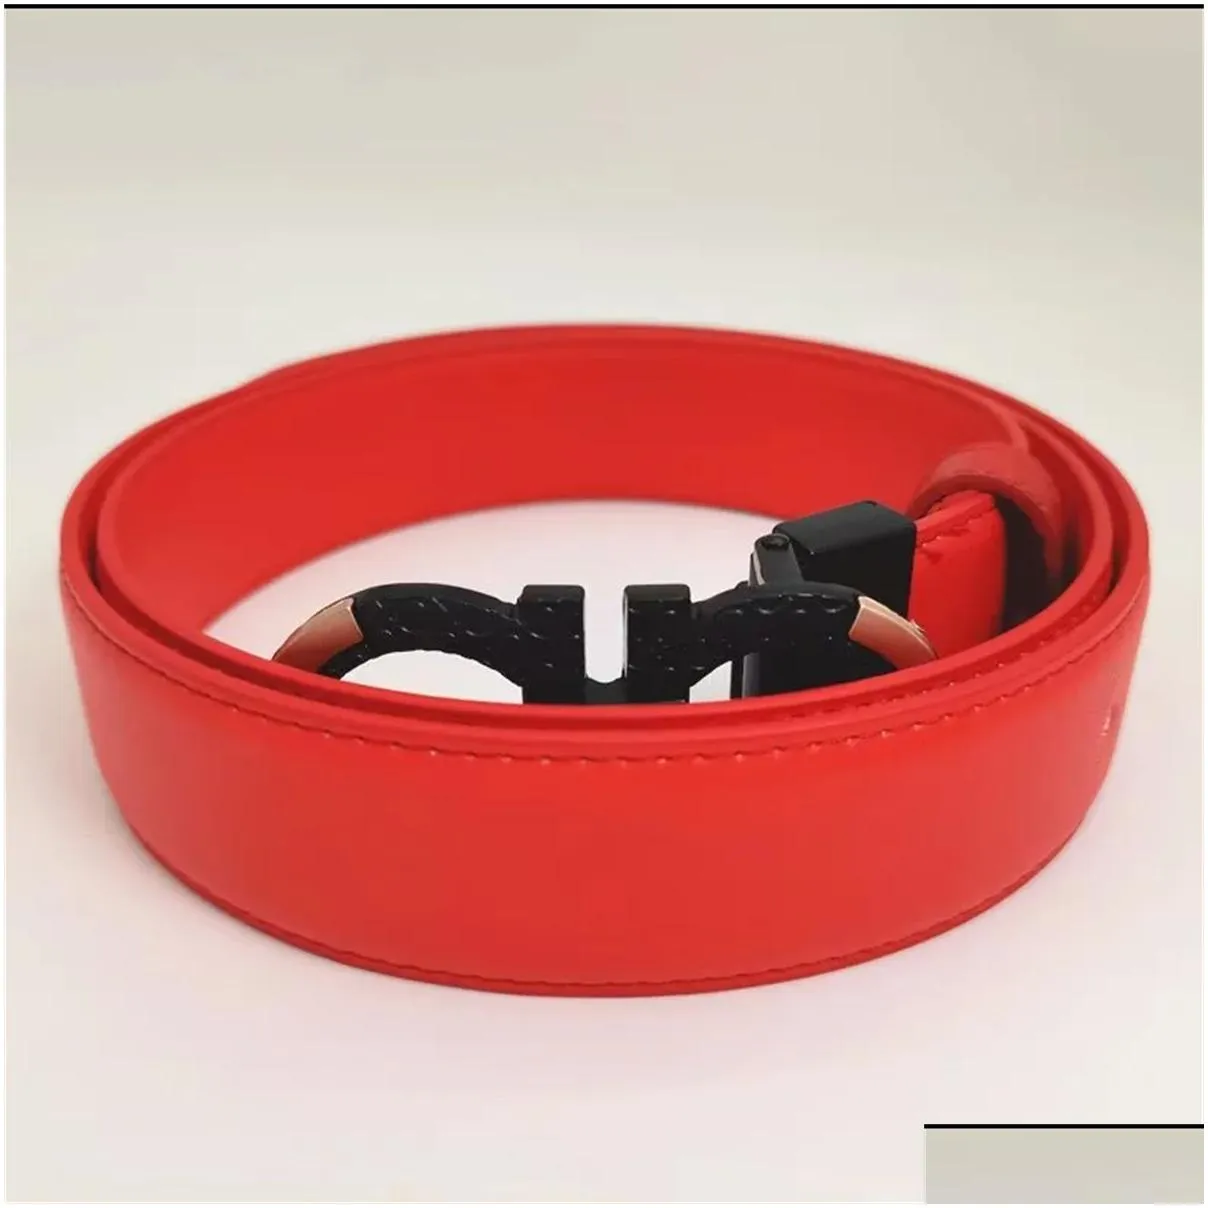 high quality mens and womens designer belt large gold buckle leather fashion belt classic strap 3.8 cm wide no box